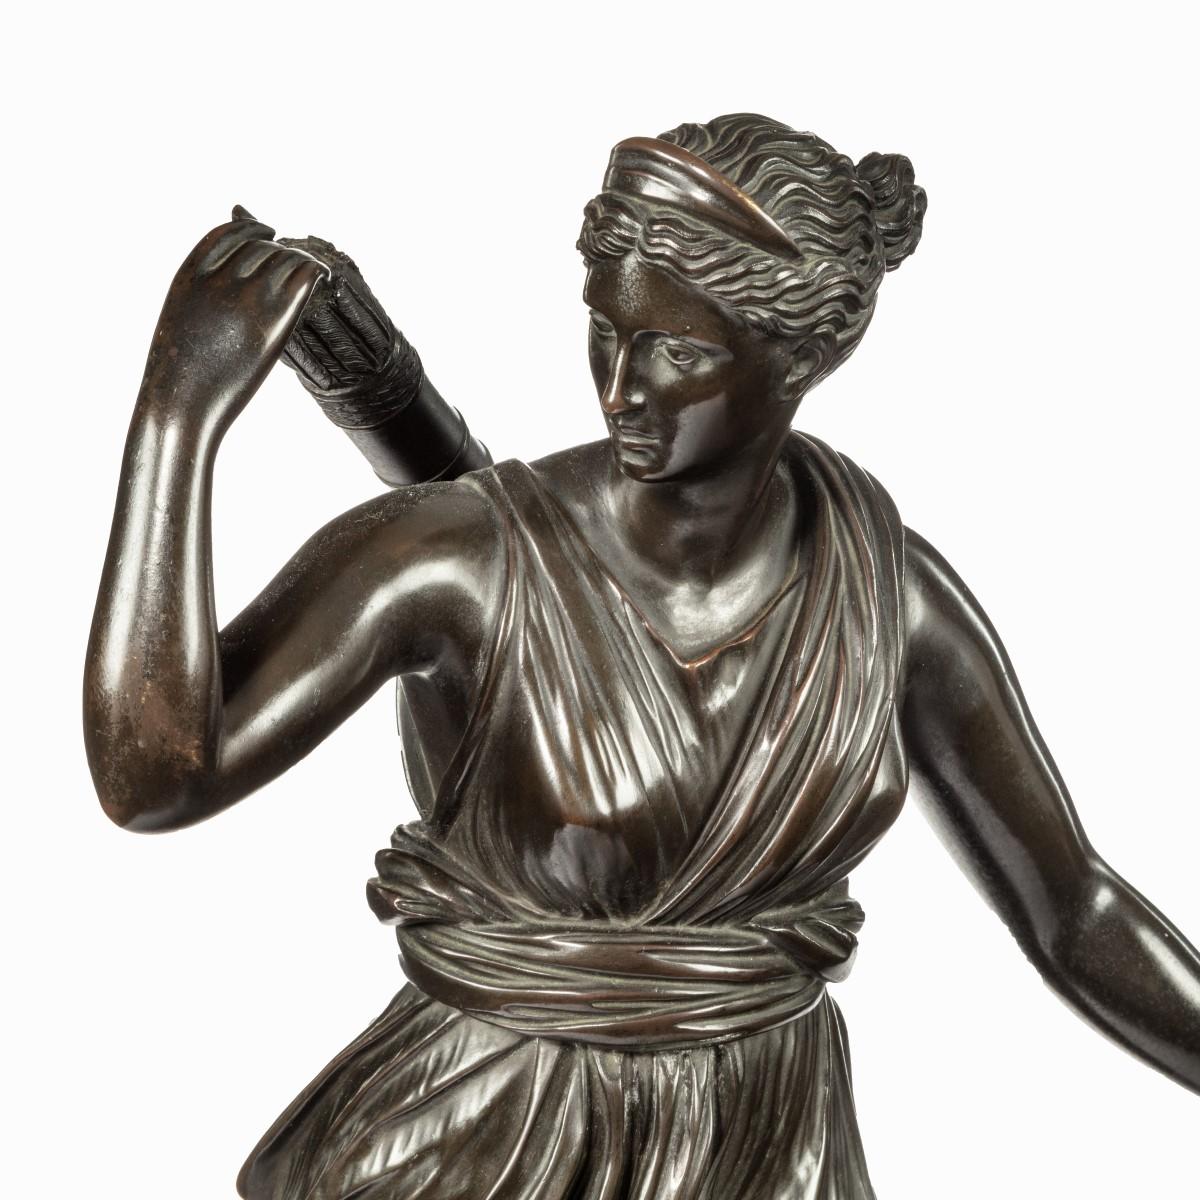 Benedetto Boschetti
The Diana of the Versailles
Rome, mid-nineteenth century
Bronze
49 cm high
Signed: ‘B. Boschetti, Roma’
Provenance: Private collection, England

The present bronze is a finely cast version of the famed ancient marble group known